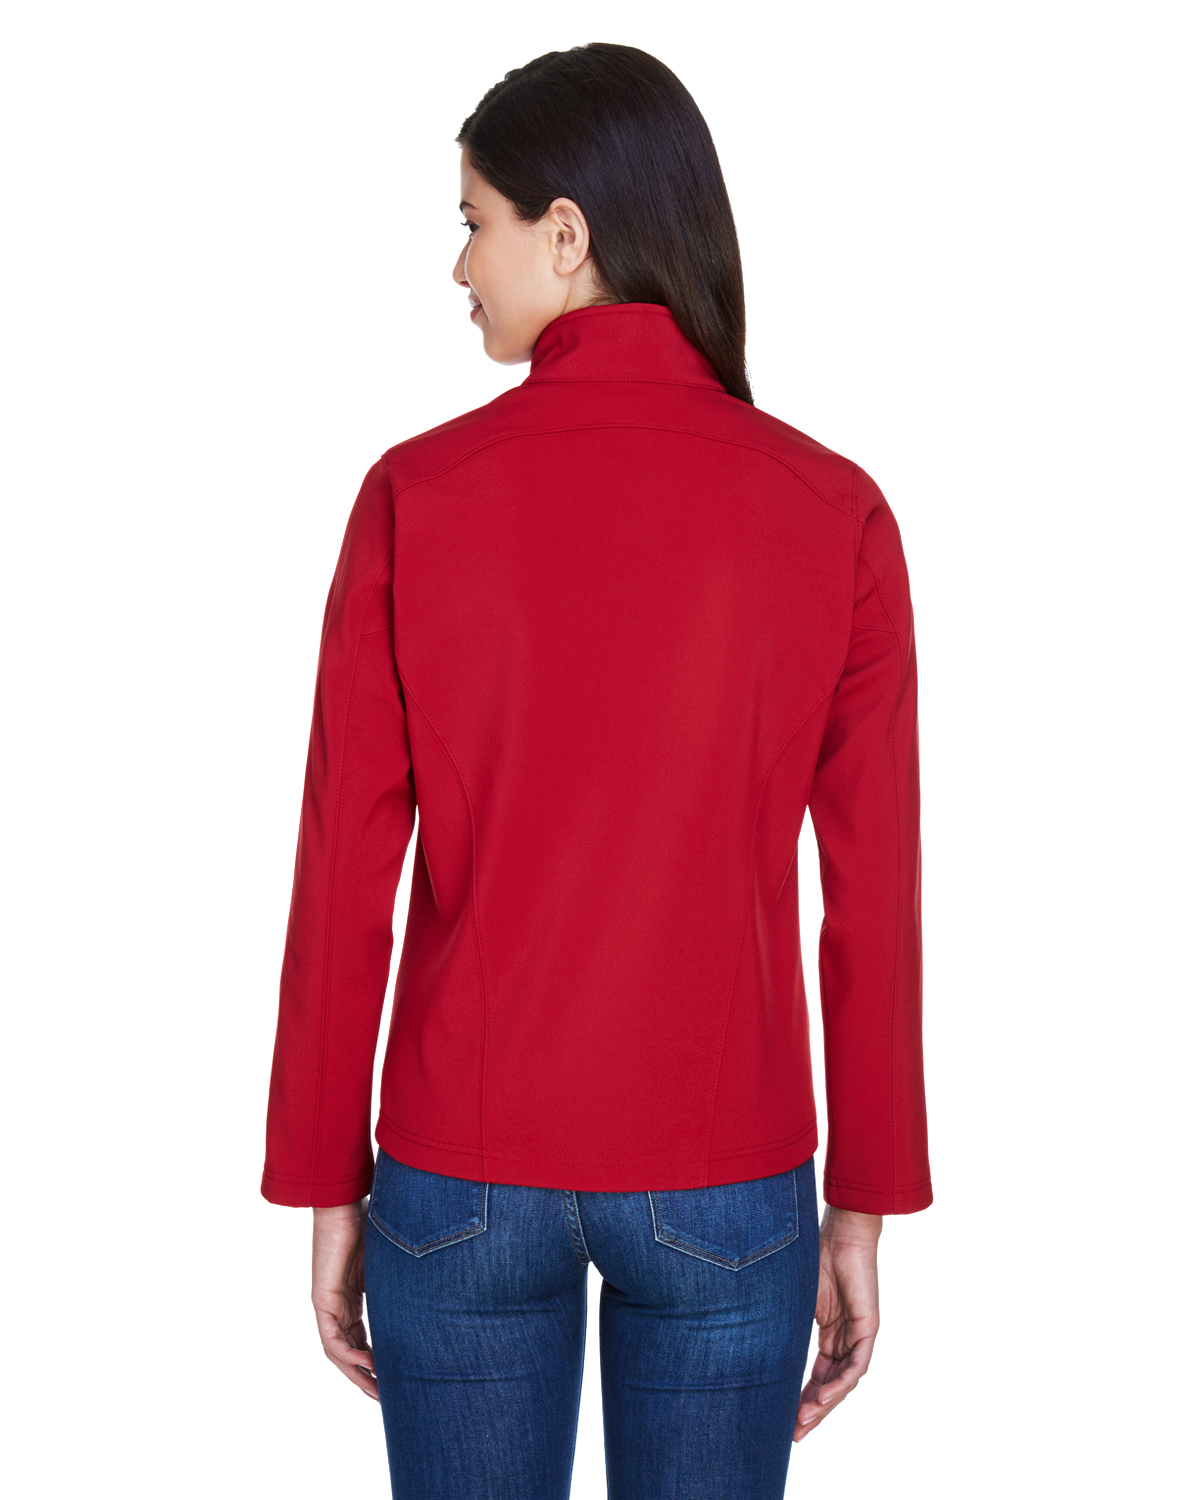 Ladies' Cruise Two-Layer Fleece Bonded Soft&nbsp;Shell Jacket - CLASSIC RED - M - image 2 of 3